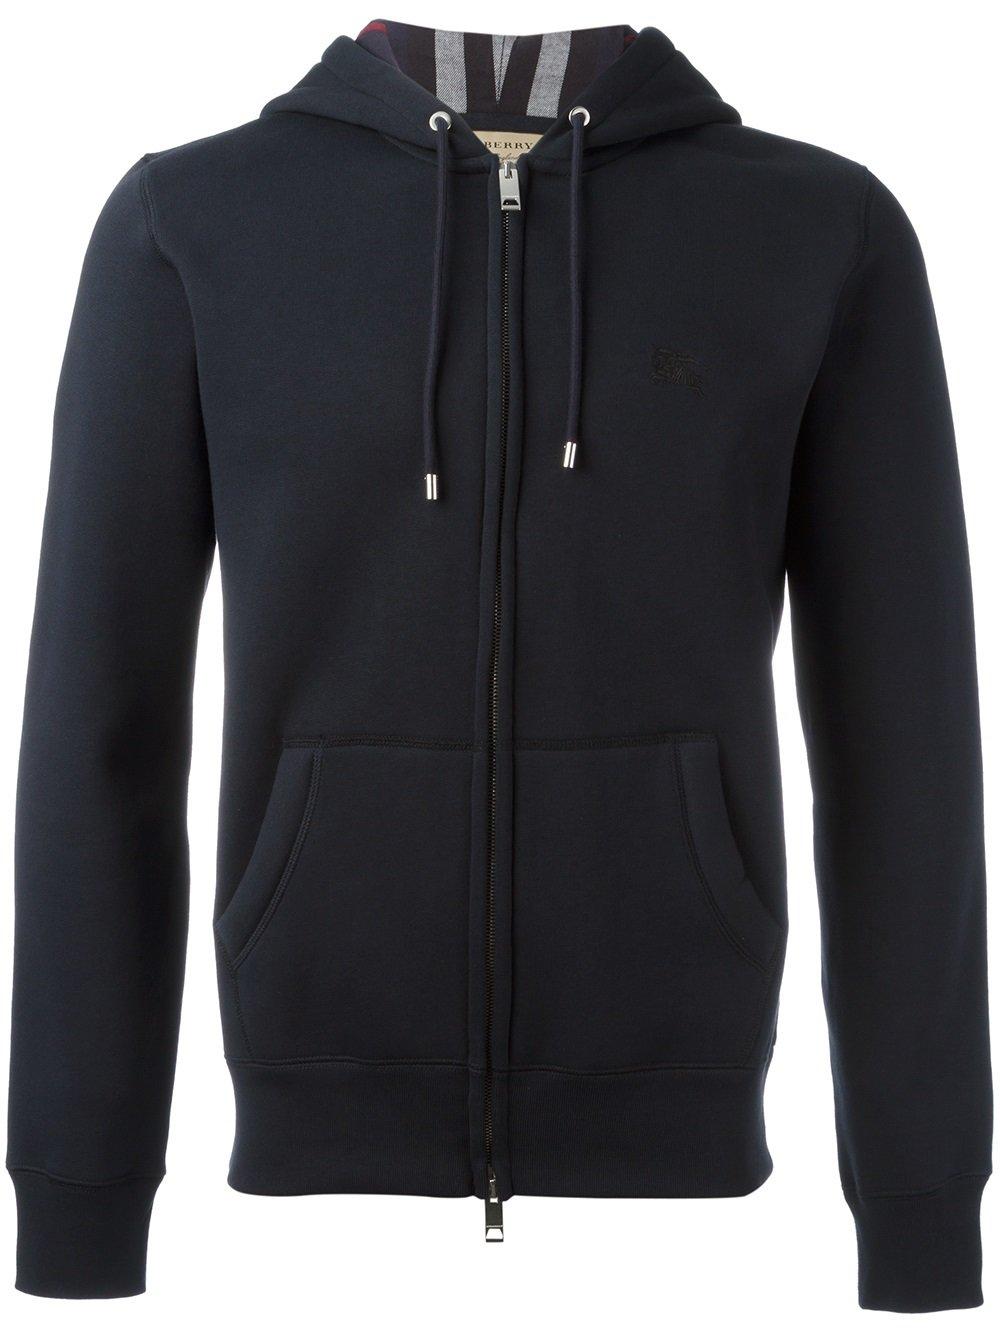 Burberry Cotton Embroidered Logo Hoodie in Blue for Men - Lyst